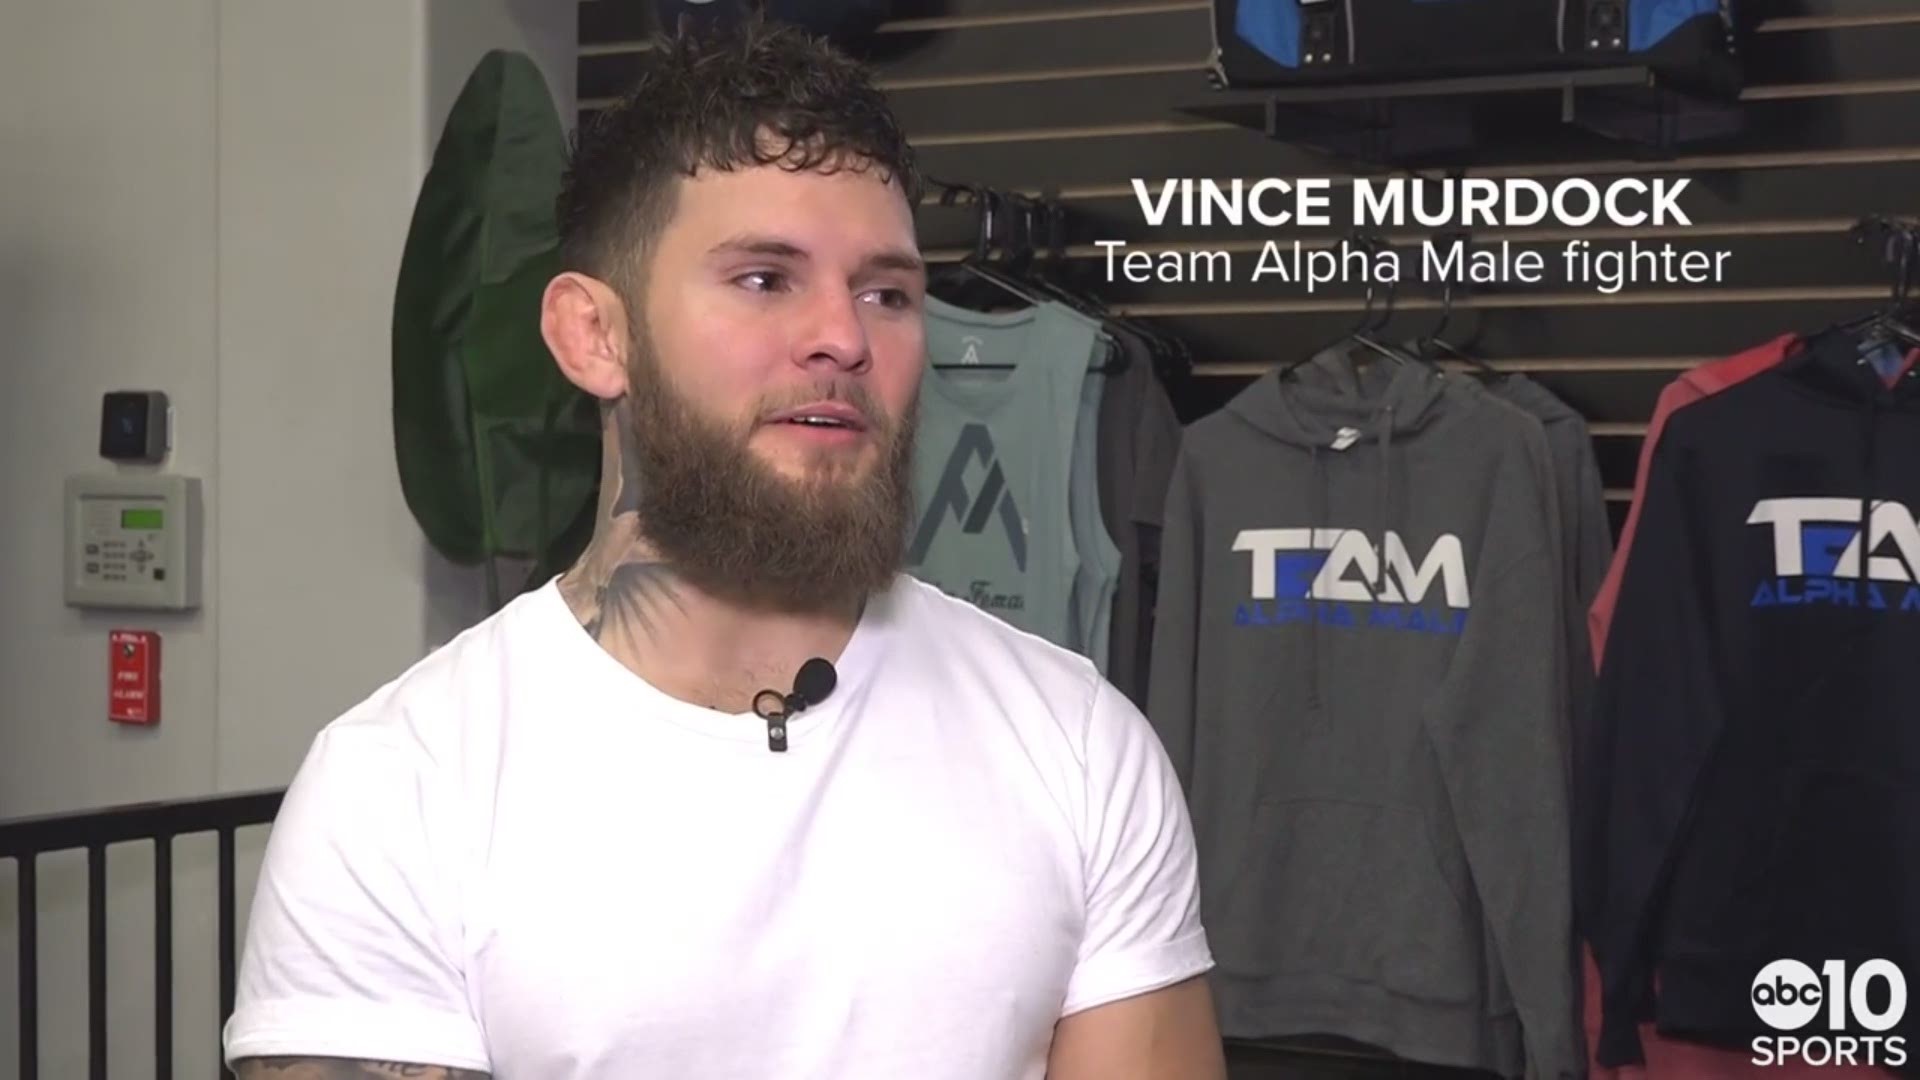 ABC10's Lina Washington and Sean Cunningham catch up with Sacramento-based UFC fighter Vince Murdock just days before he undergoes an emergency brain surgery.